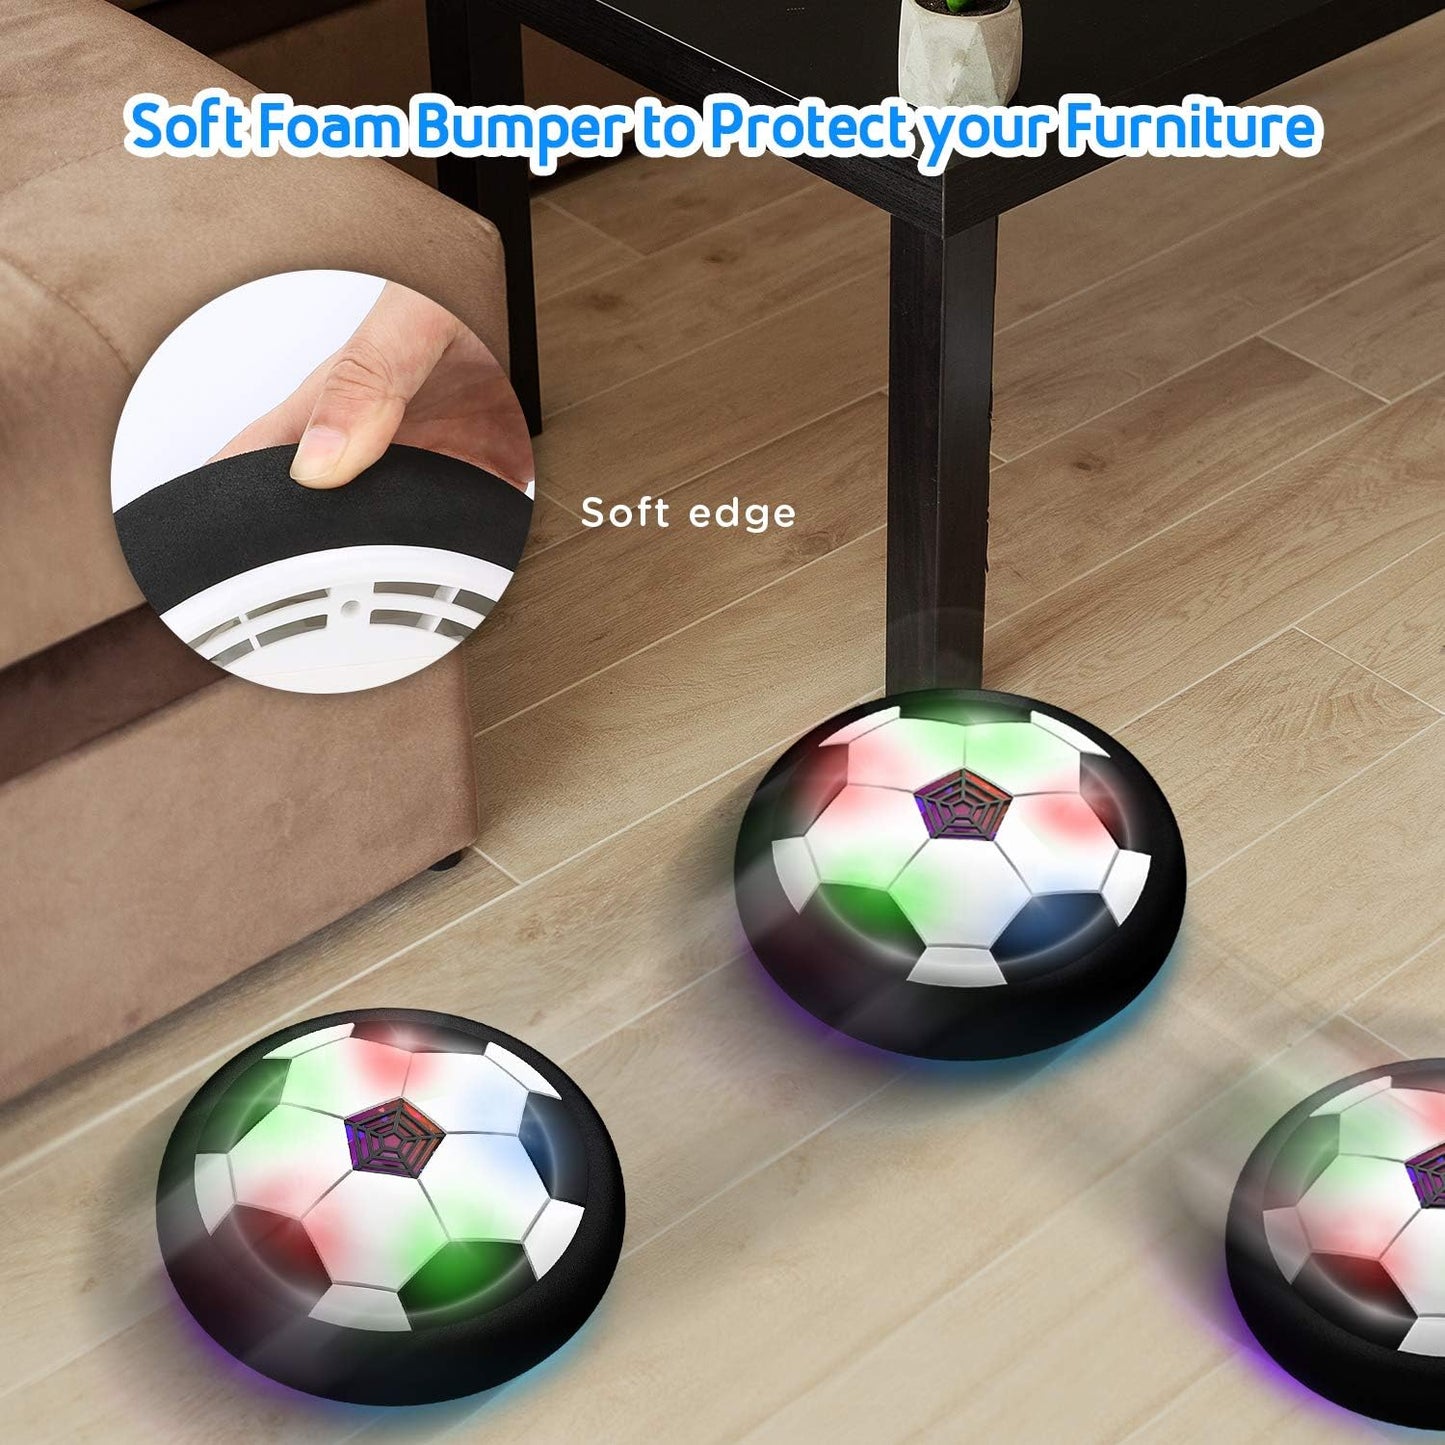 Hover Soccer Ball: The Ultimate Indoor home training tool for football